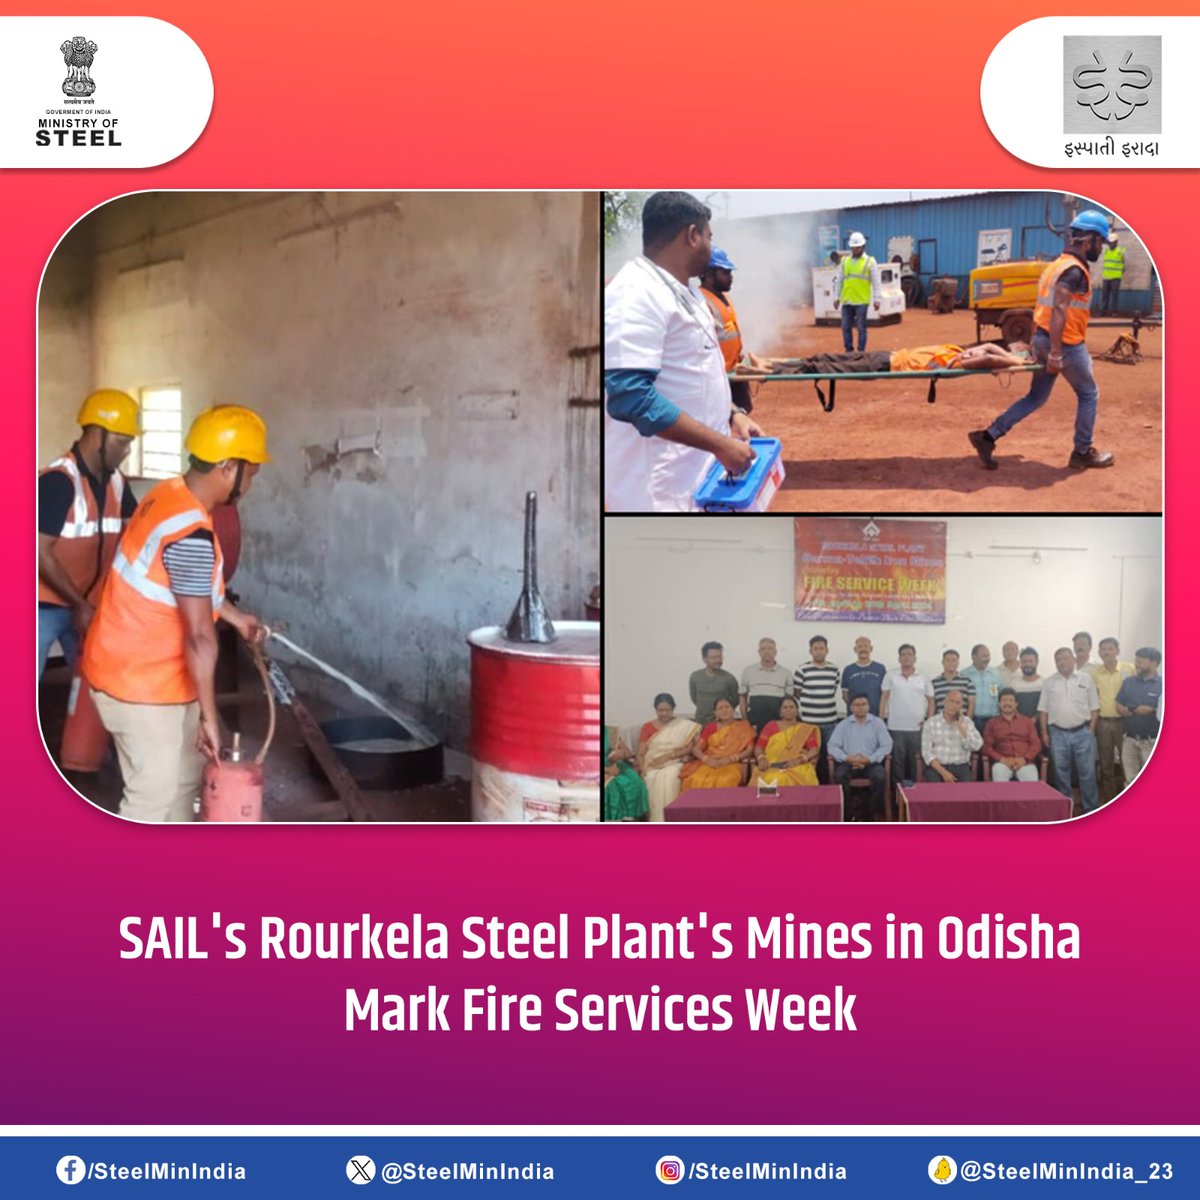 Safety in Focus as #SAIL's mines in Odisha, part of #RourkelaSteelPlant, commemorate Fire Services Week, emphasizing the importance of fire prevention and readiness. #FireSafetyWeek #SafetyFirst